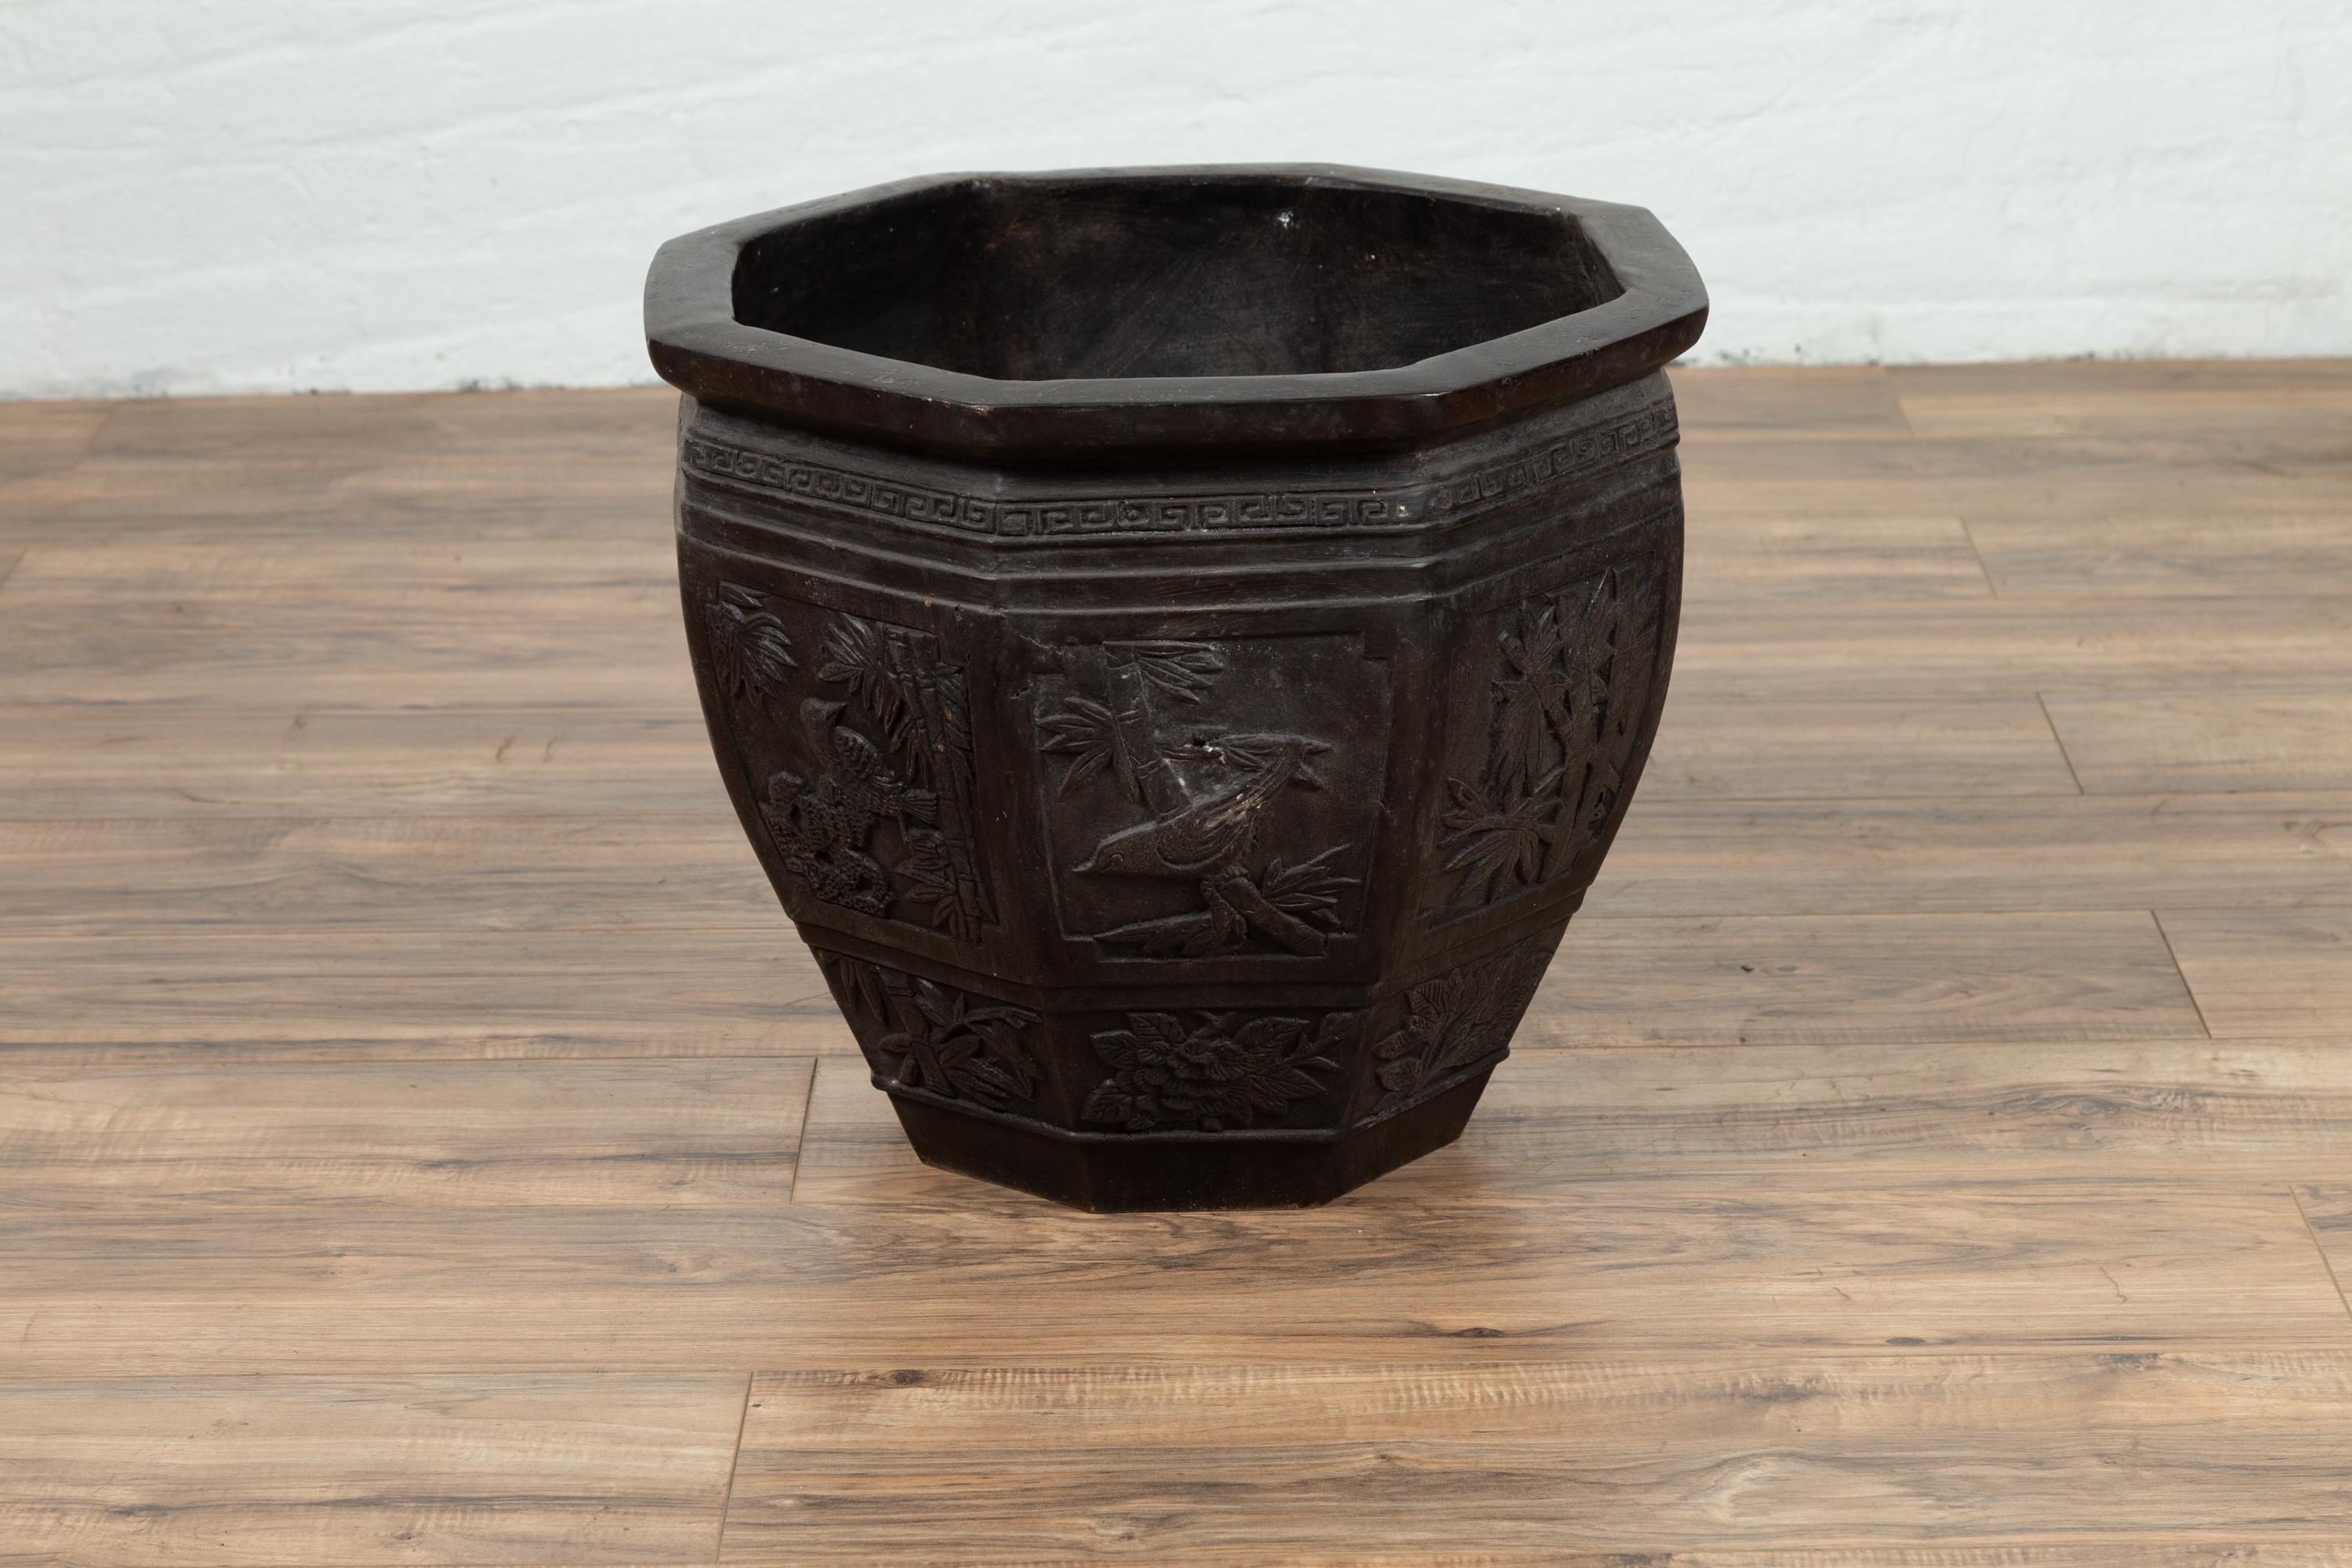 Vintage Asian Octagonal Bronze Planter with Floral, Foliage and Bird Motifs 1